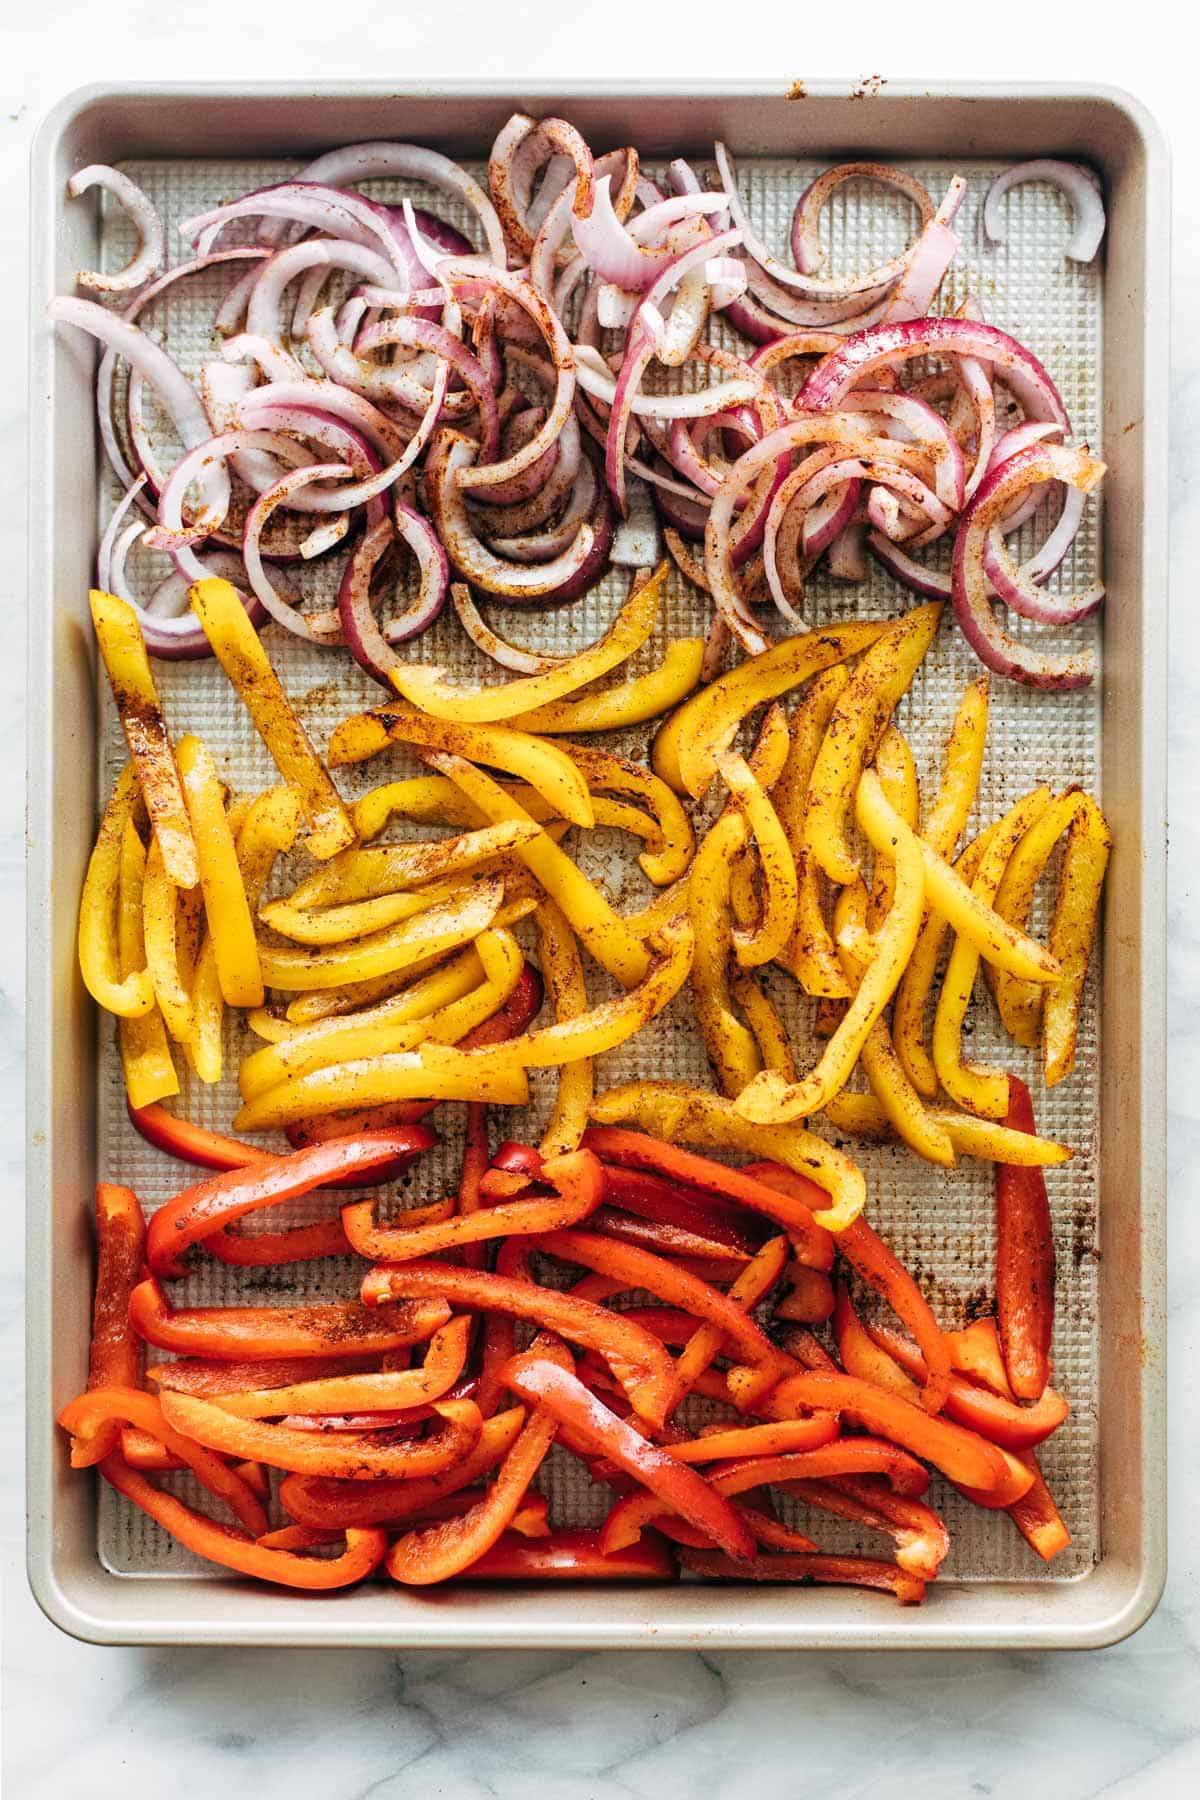 Onions and peppers on a sheet pan.